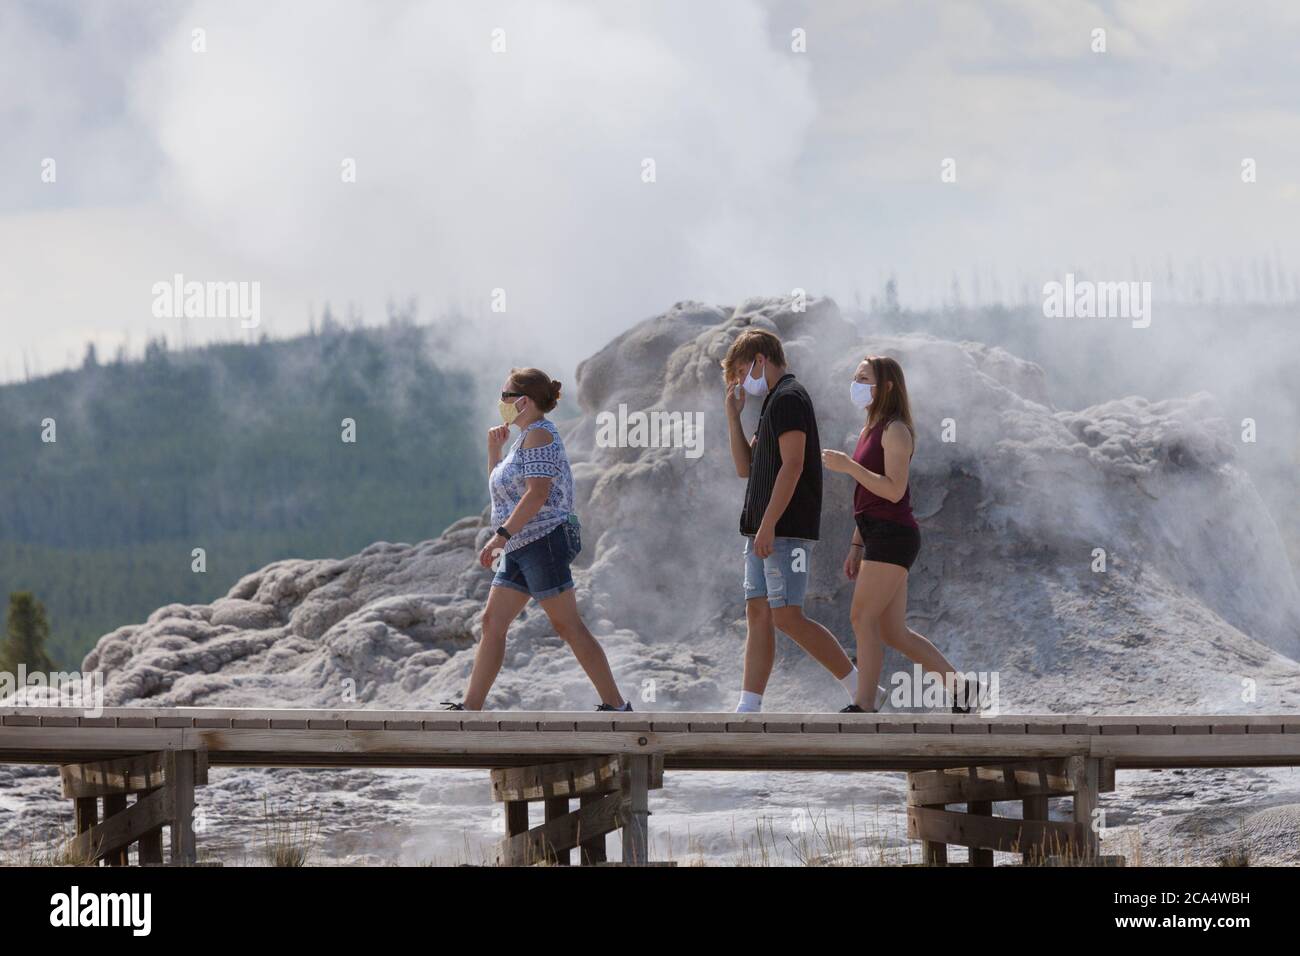 Visitors wearing face masks pass the Castle Geyser on Monday, August 3, 2020. The park recently reported several positive cases of the COVID-19 virus among visitors and concessioners. Stock Photo